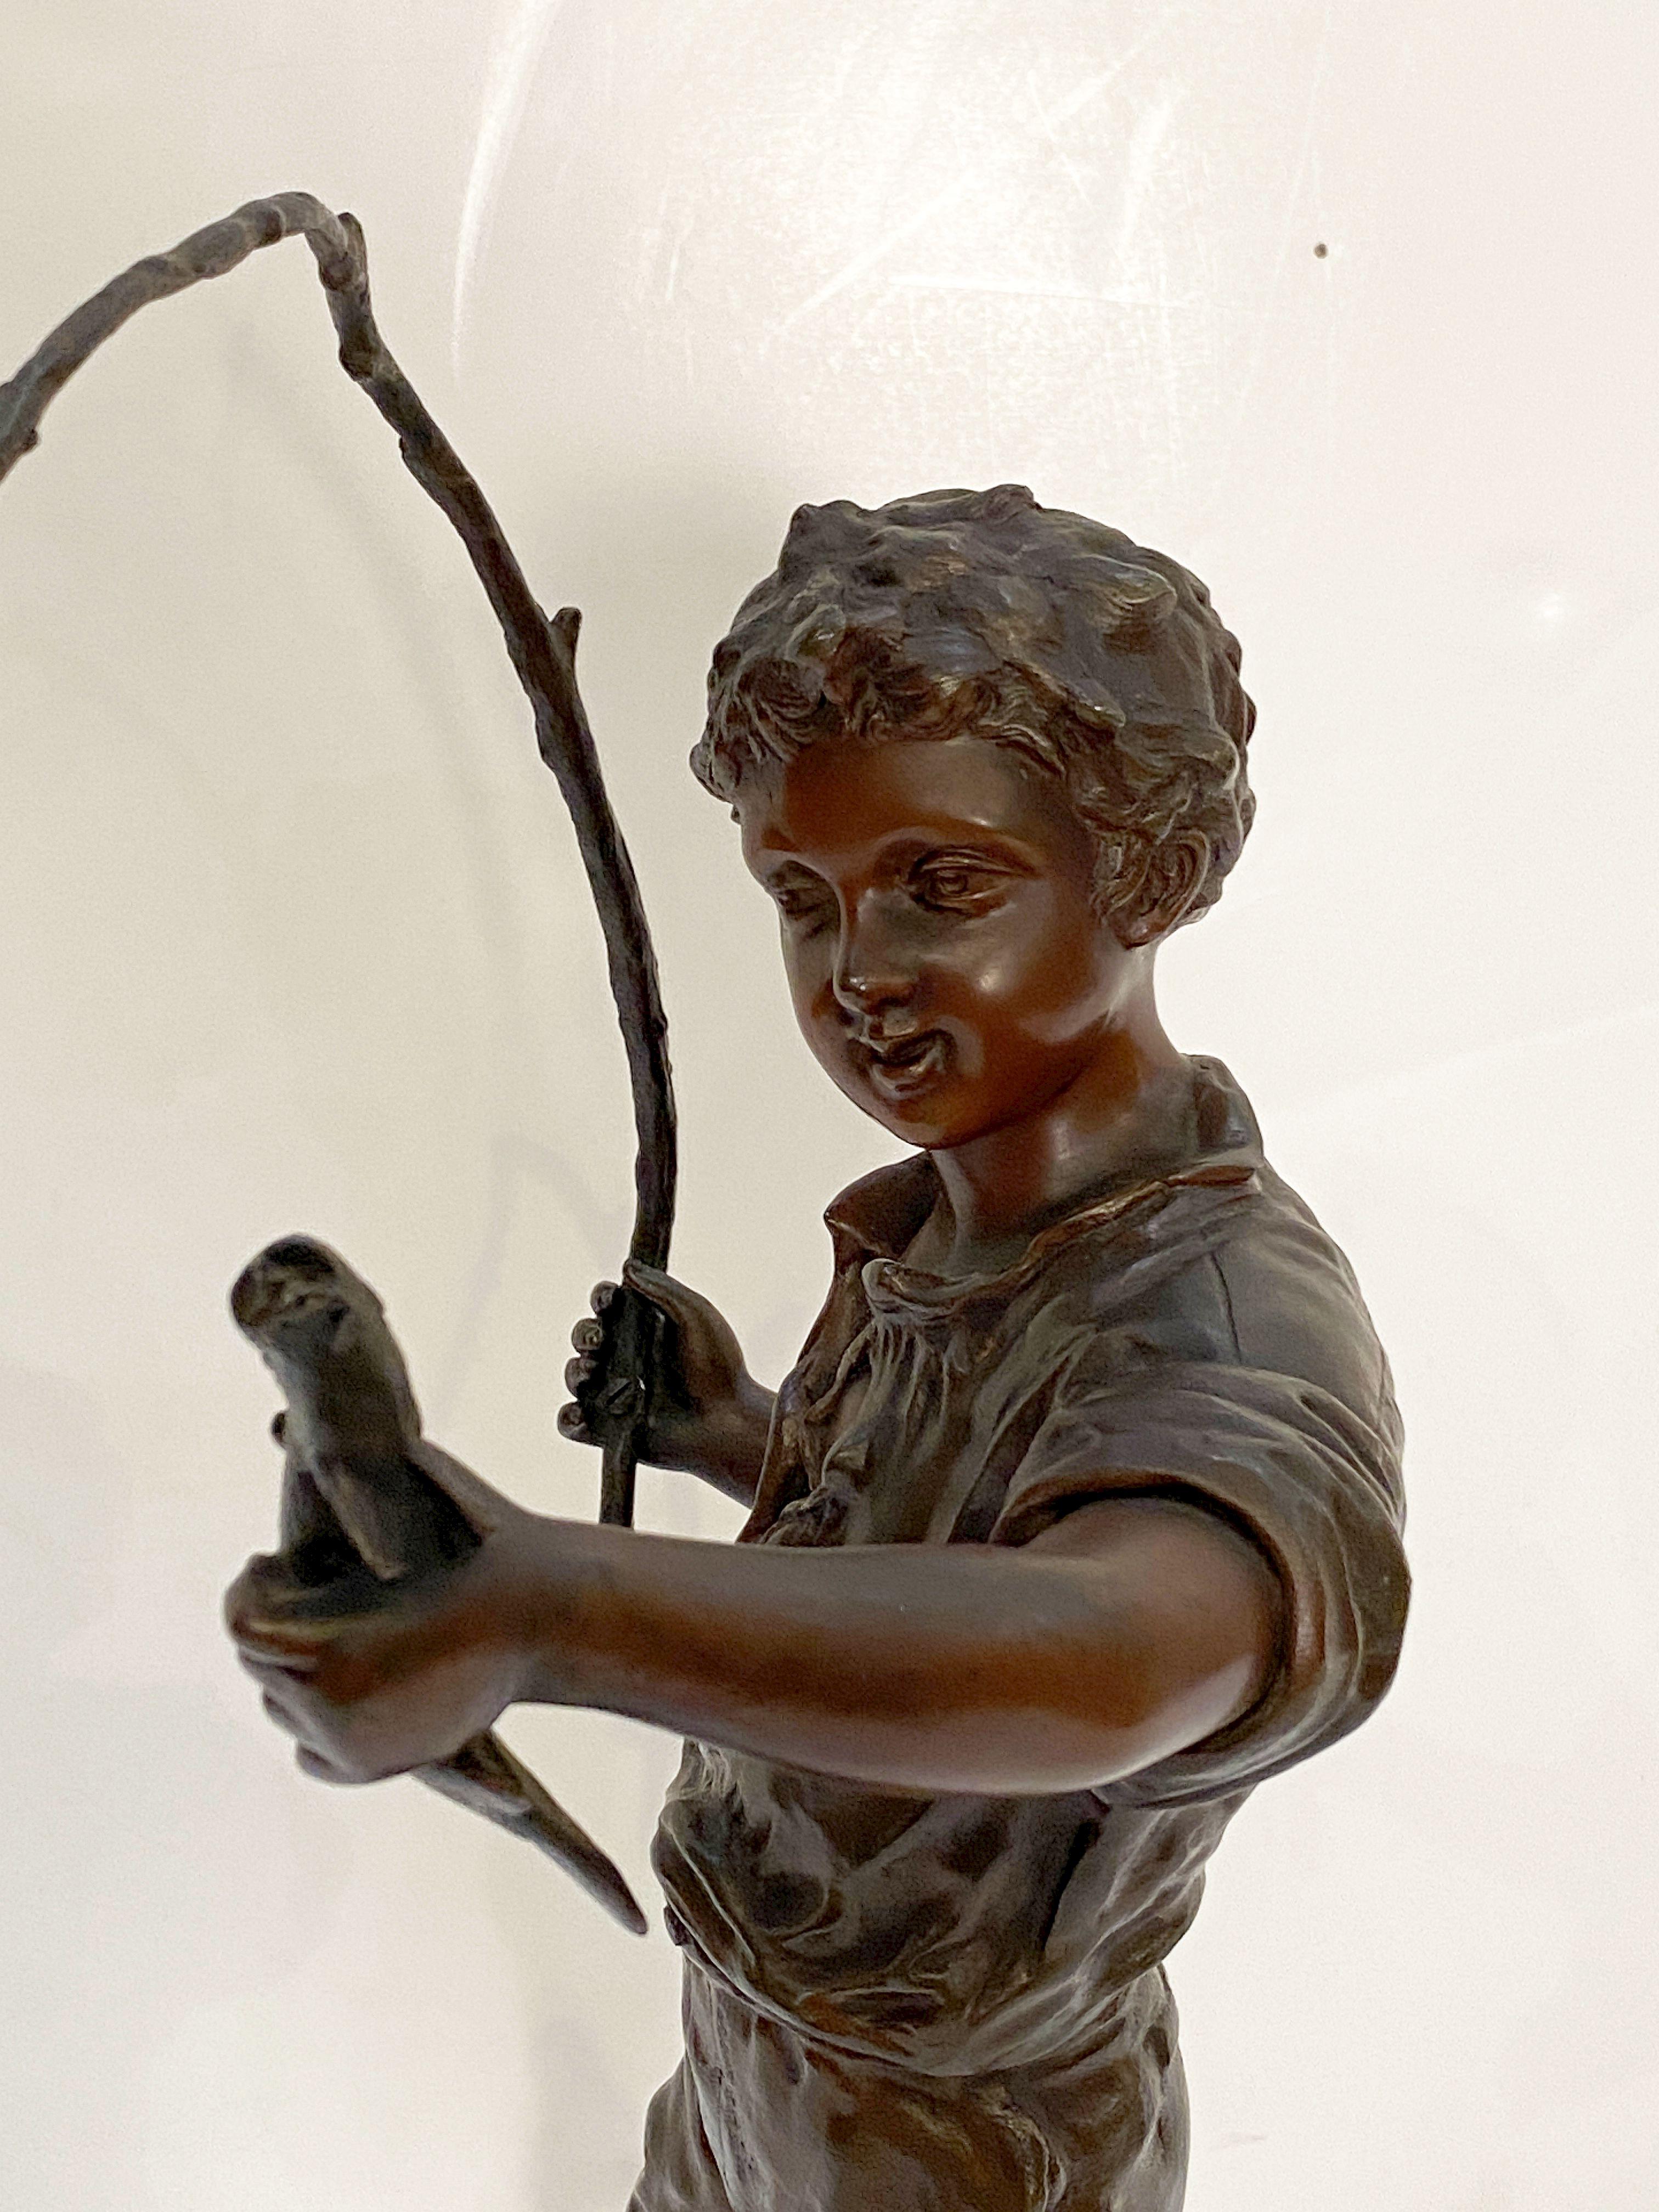 Heureux Pêcheur or Happy Fisherboy Bronze Sculptural Figure by Charles Anfrie  5